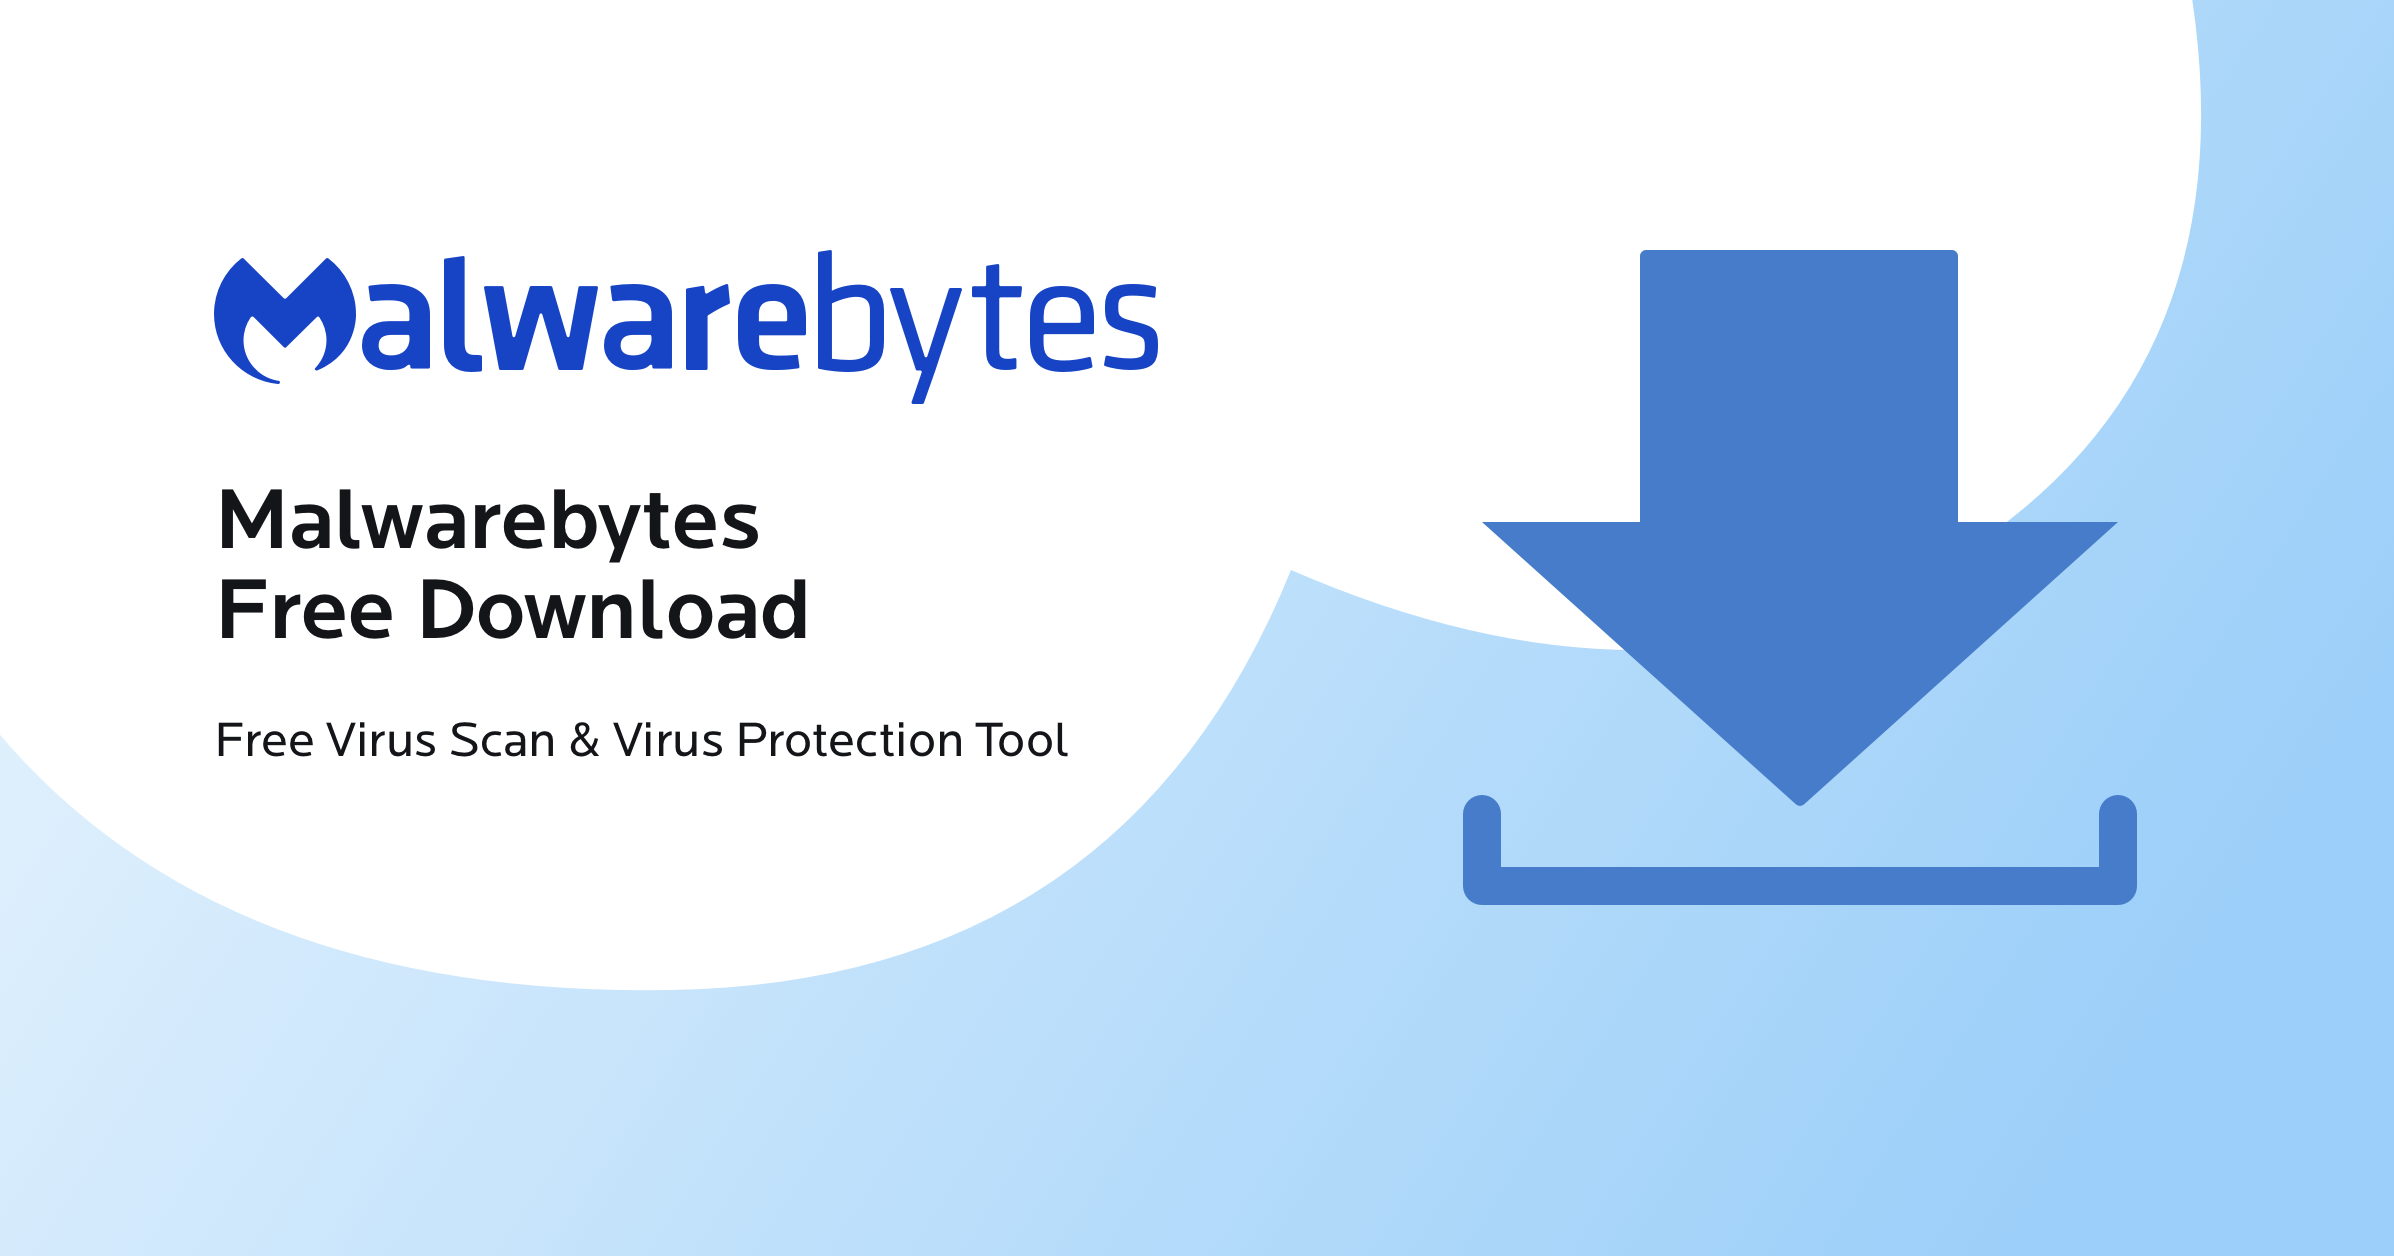 Download and install a reputable anti-malware tool such as Malwarebytes.
Open the anti-malware tool.